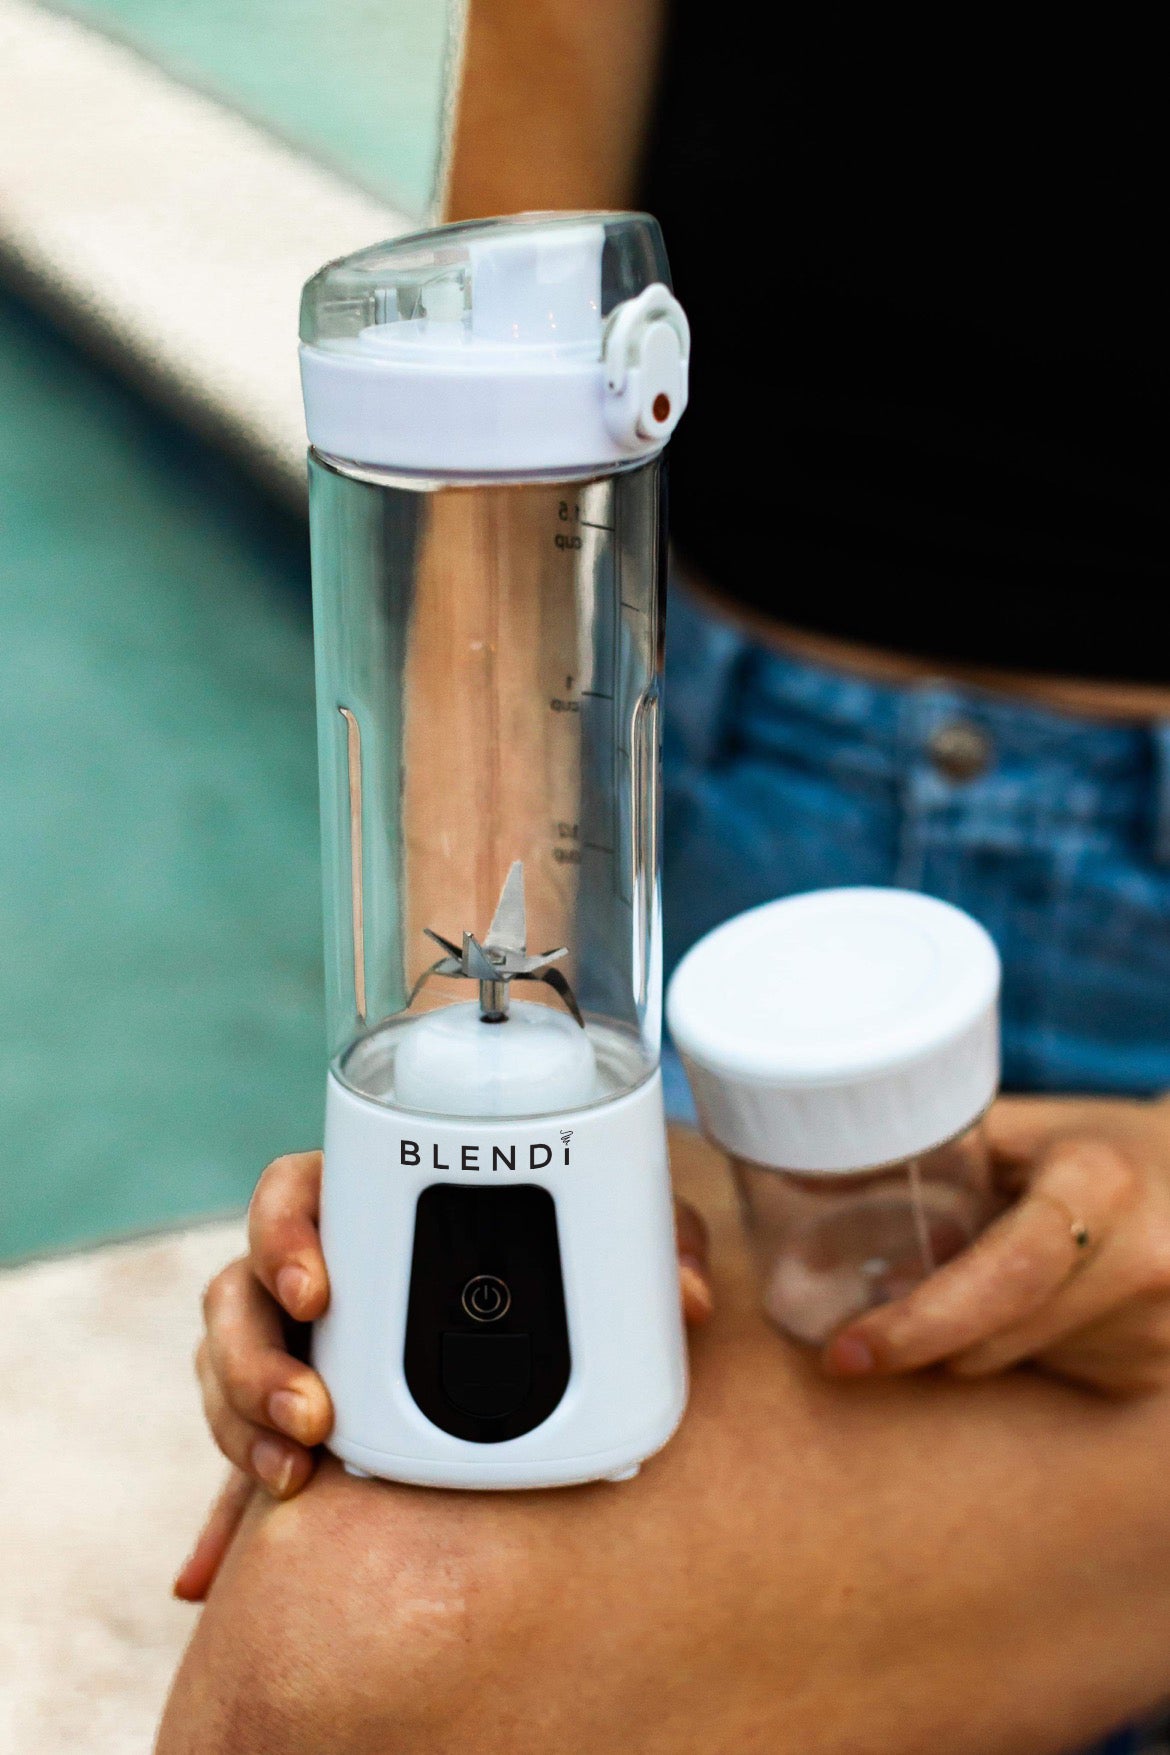 Childhood to adulthood, BLENDi is a blender for the ages